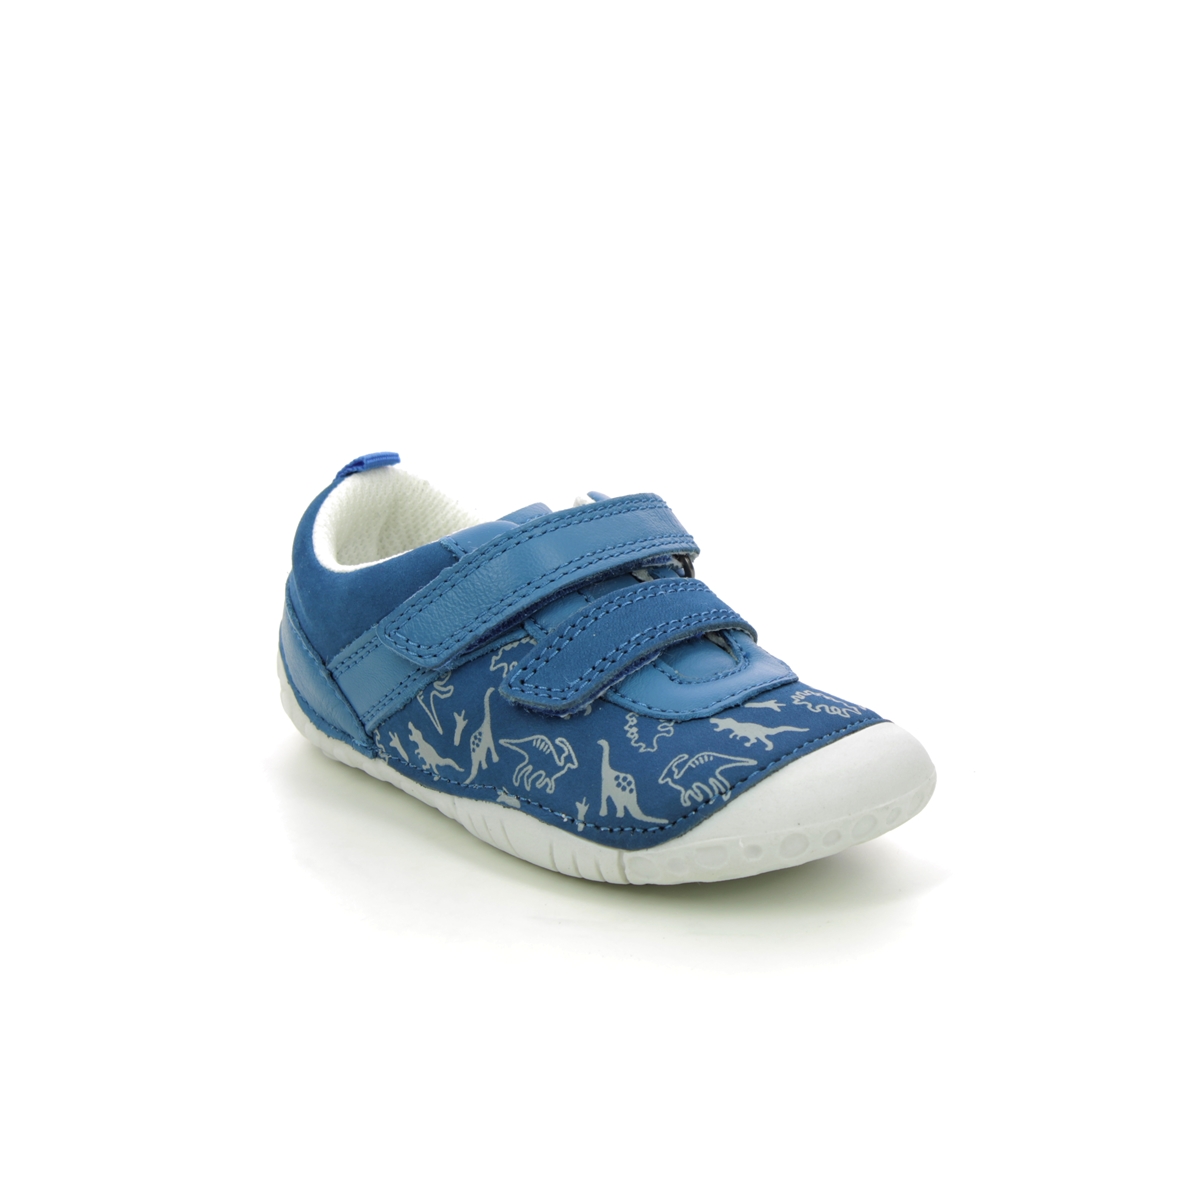 Start Rite - Roar 2V In Blue Nubuck 0767-26F In Size 4 In Plain Blue Nubuck Boys First And Toddler Shoes  In Blue Nubuck For kids